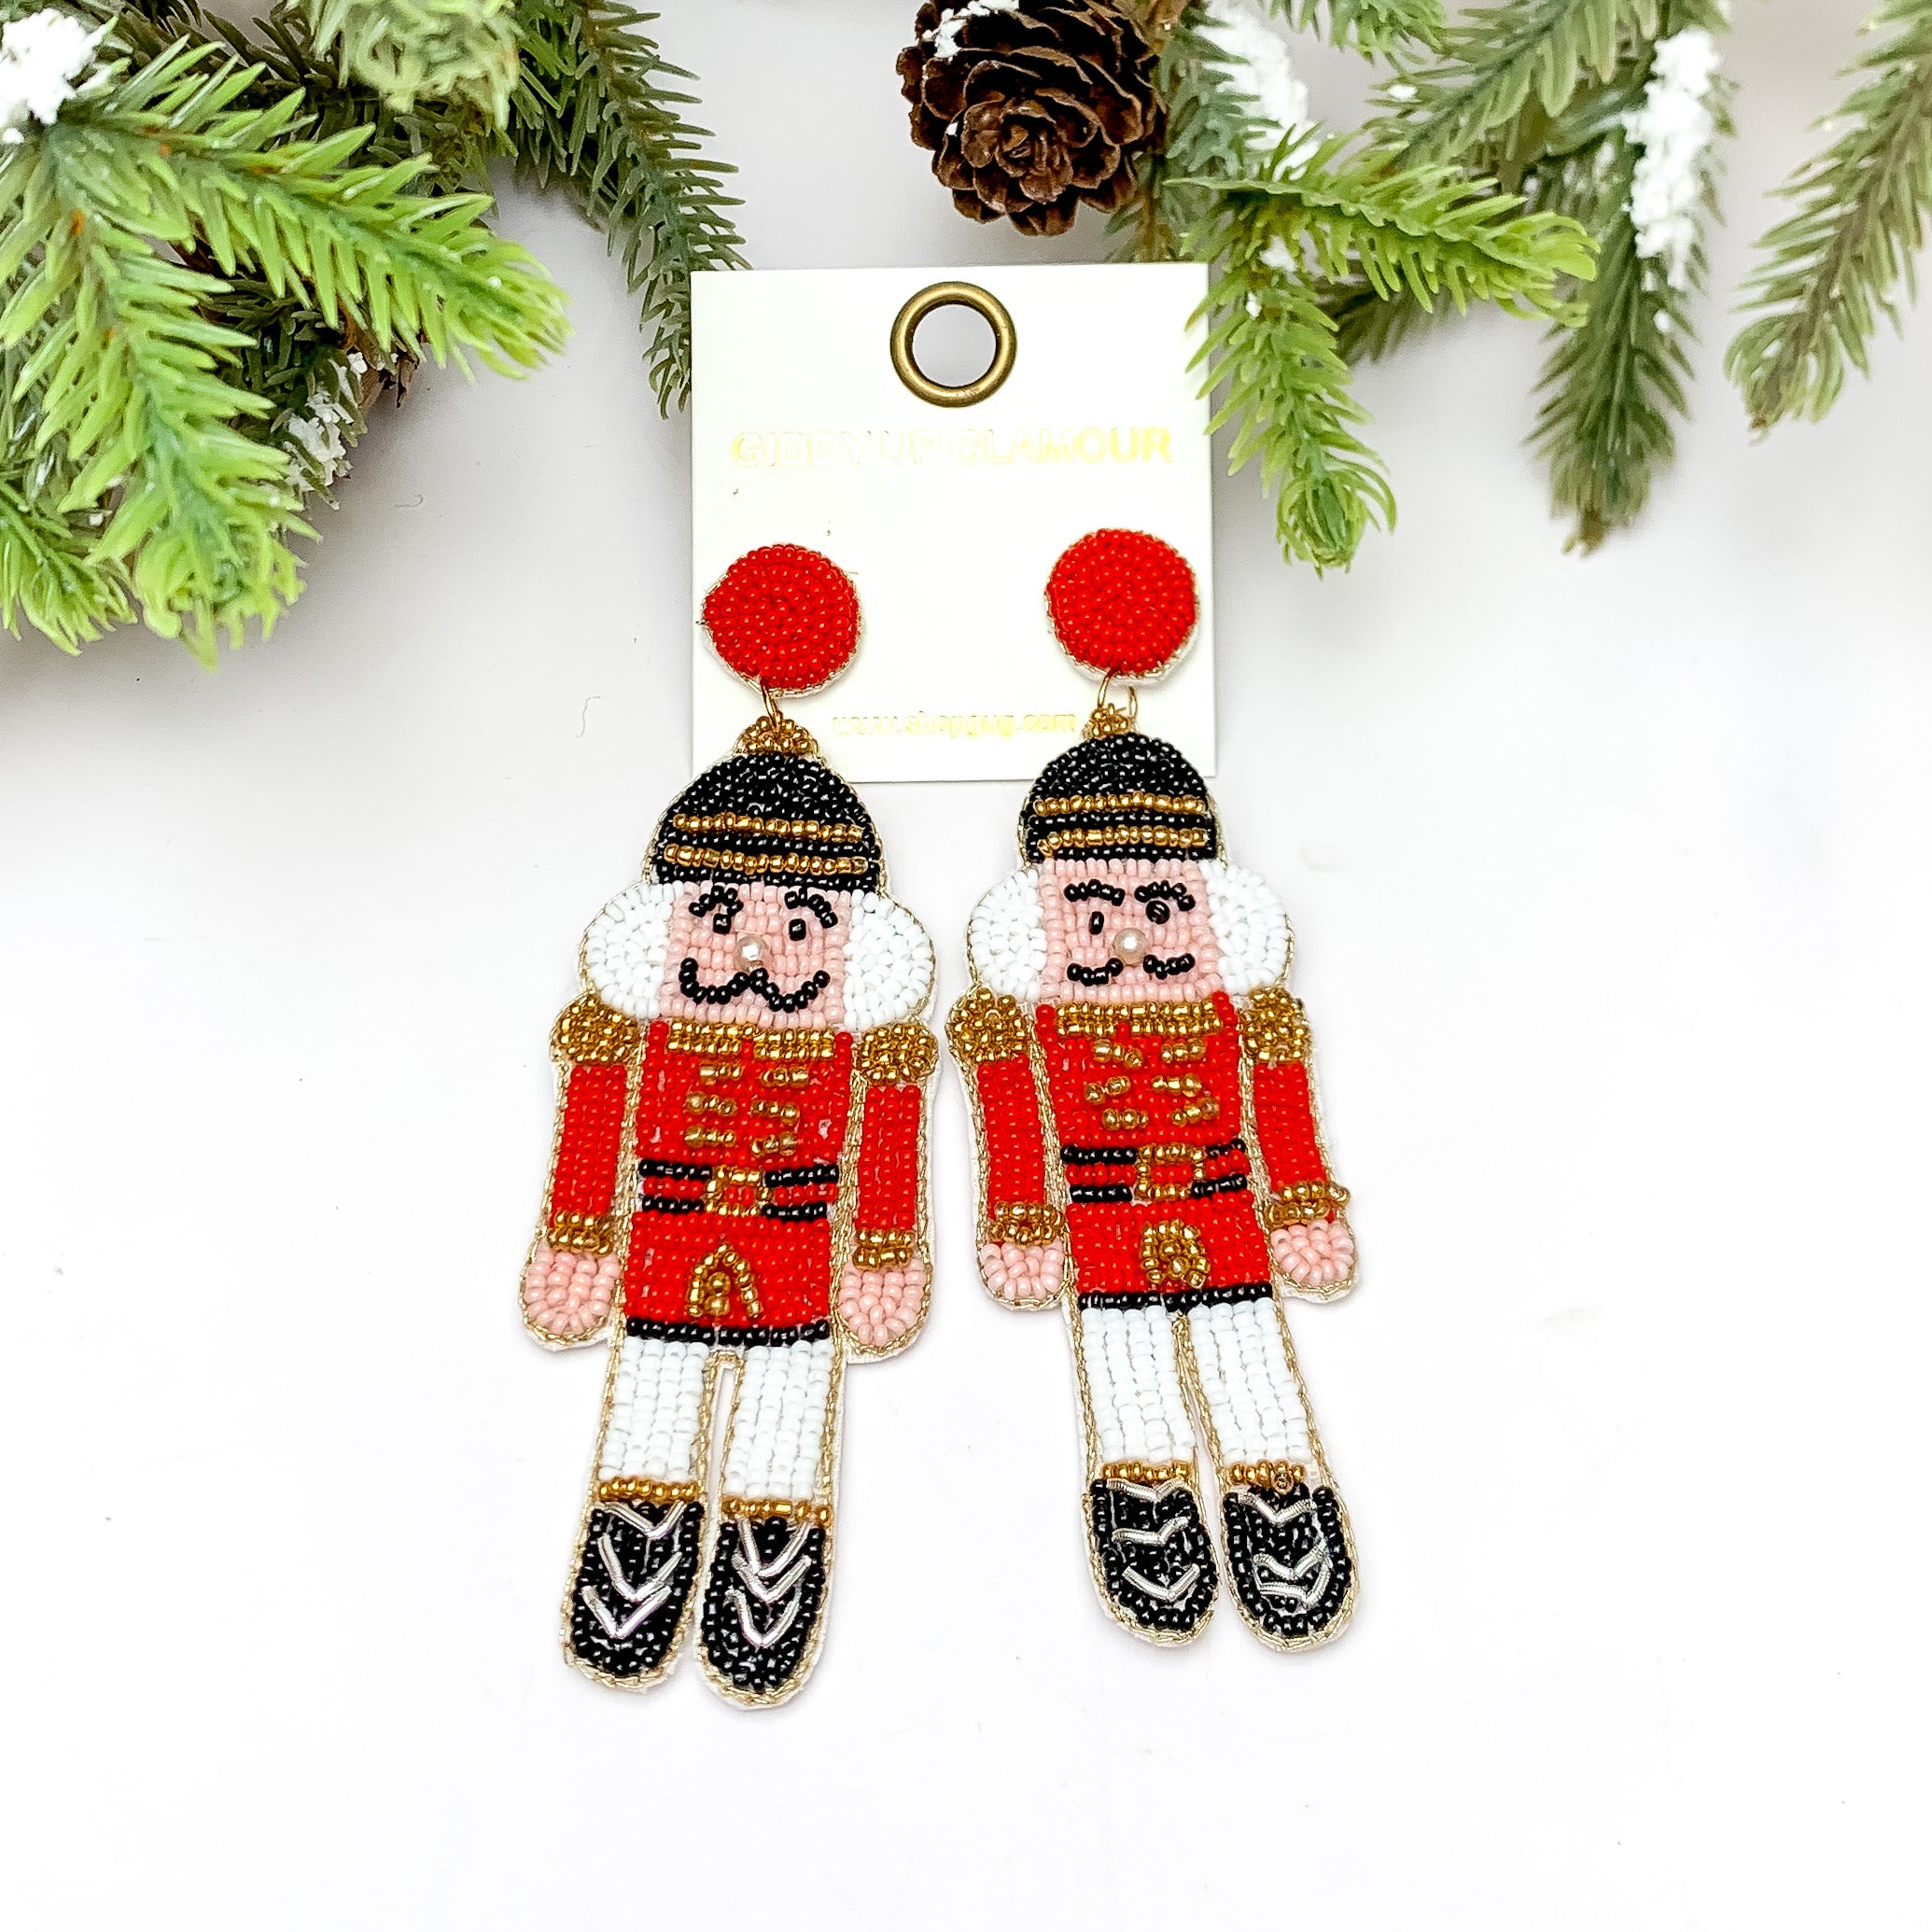 Nutcracker Beaded Earrings in Red. These earrings are pictured on a white background with a tree and pine cones at the top.